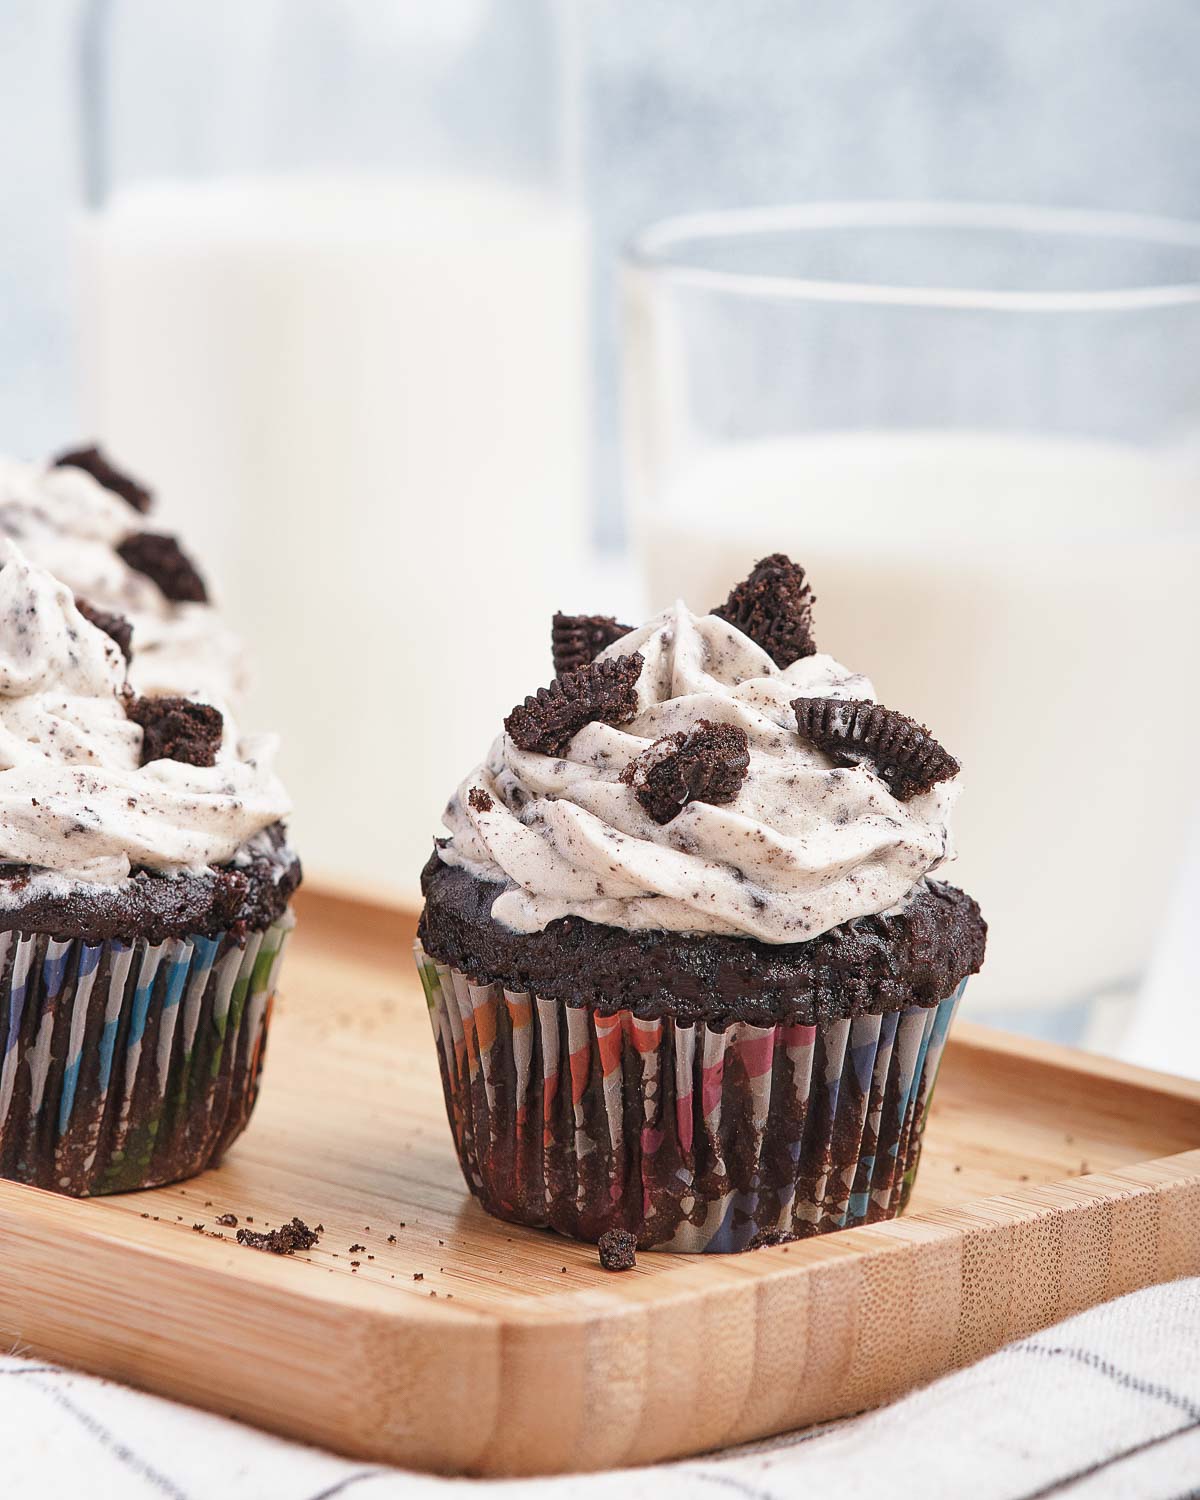 Chocolate cupcakes on wooden board with Oreo frosting and broken cookies on top.